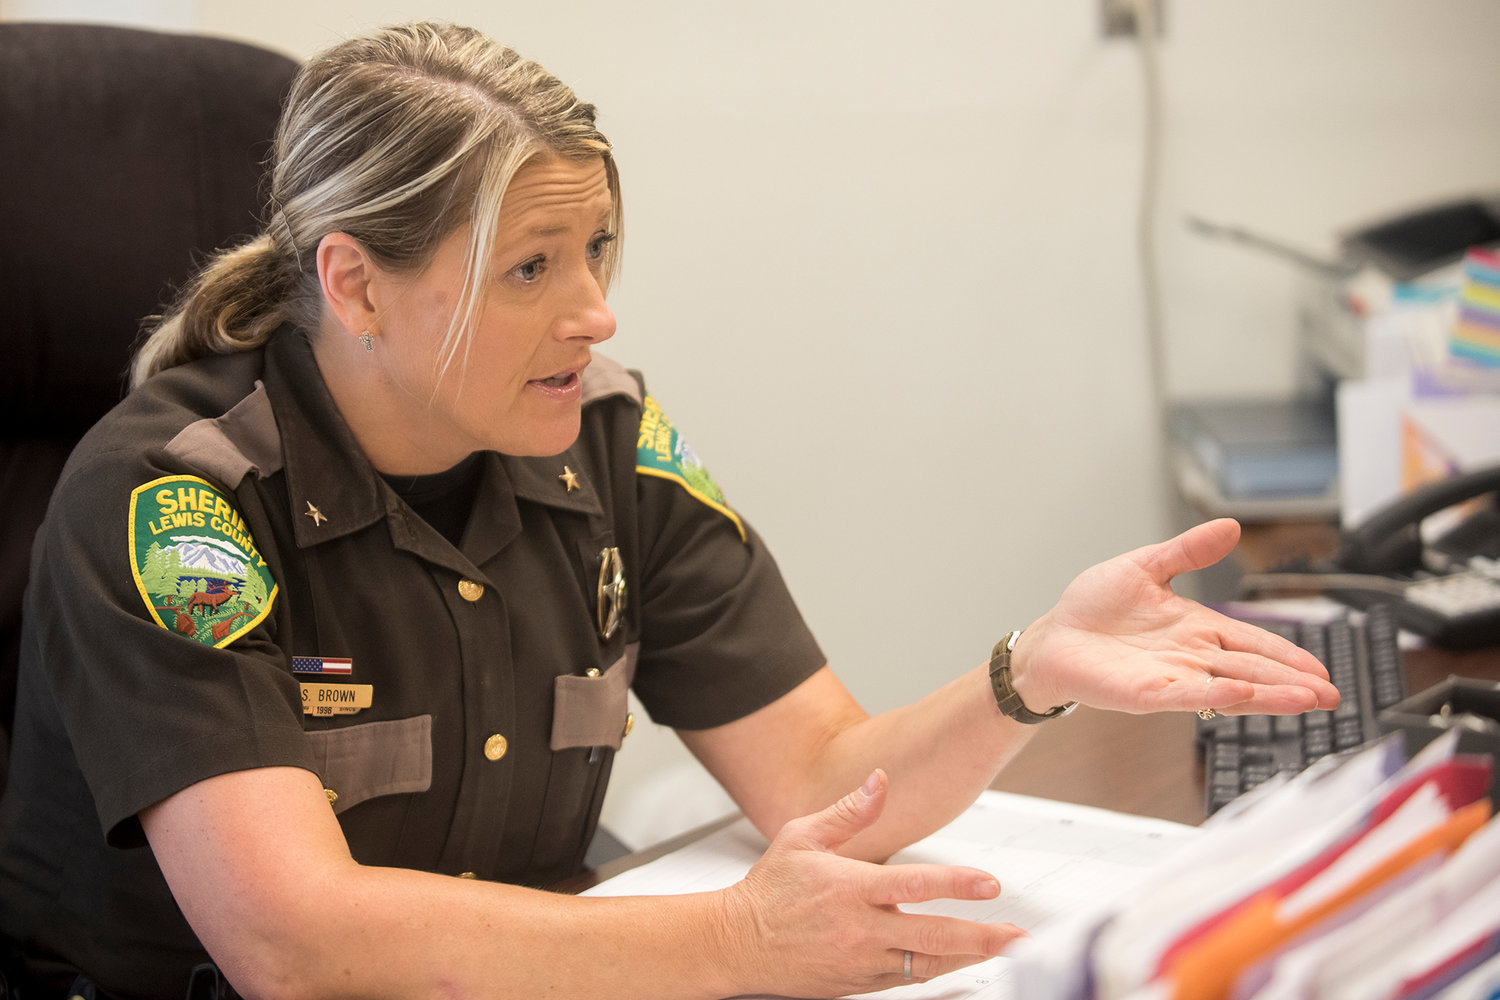 Chief Deputy Stacy Brown talks about her experiences with the Lewis County Sheriff's Office during an interview on Thursday morning in Chehalis.